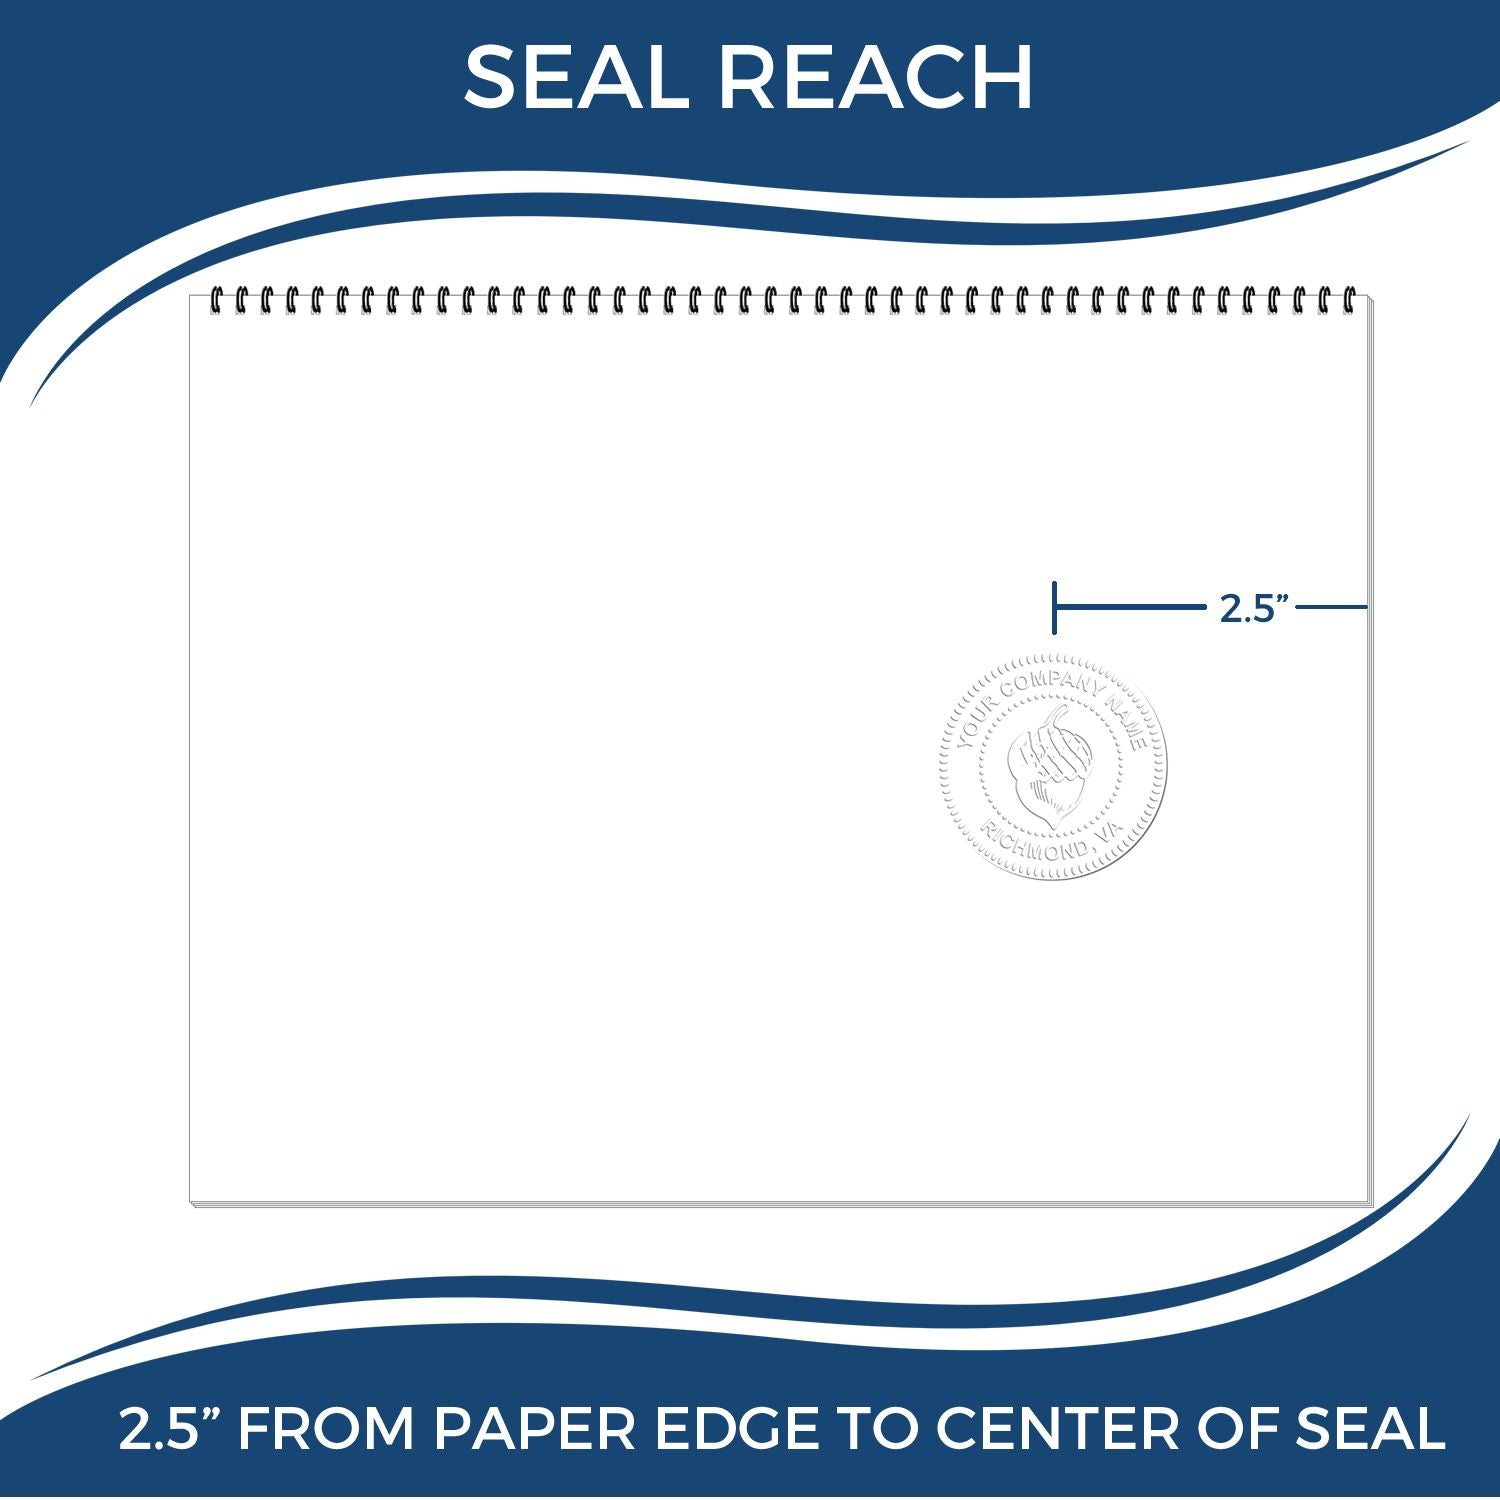 An infographic showing the seal reach which is represented by a ruler and a miniature seal image of the Long Reach Ohio PE Seal